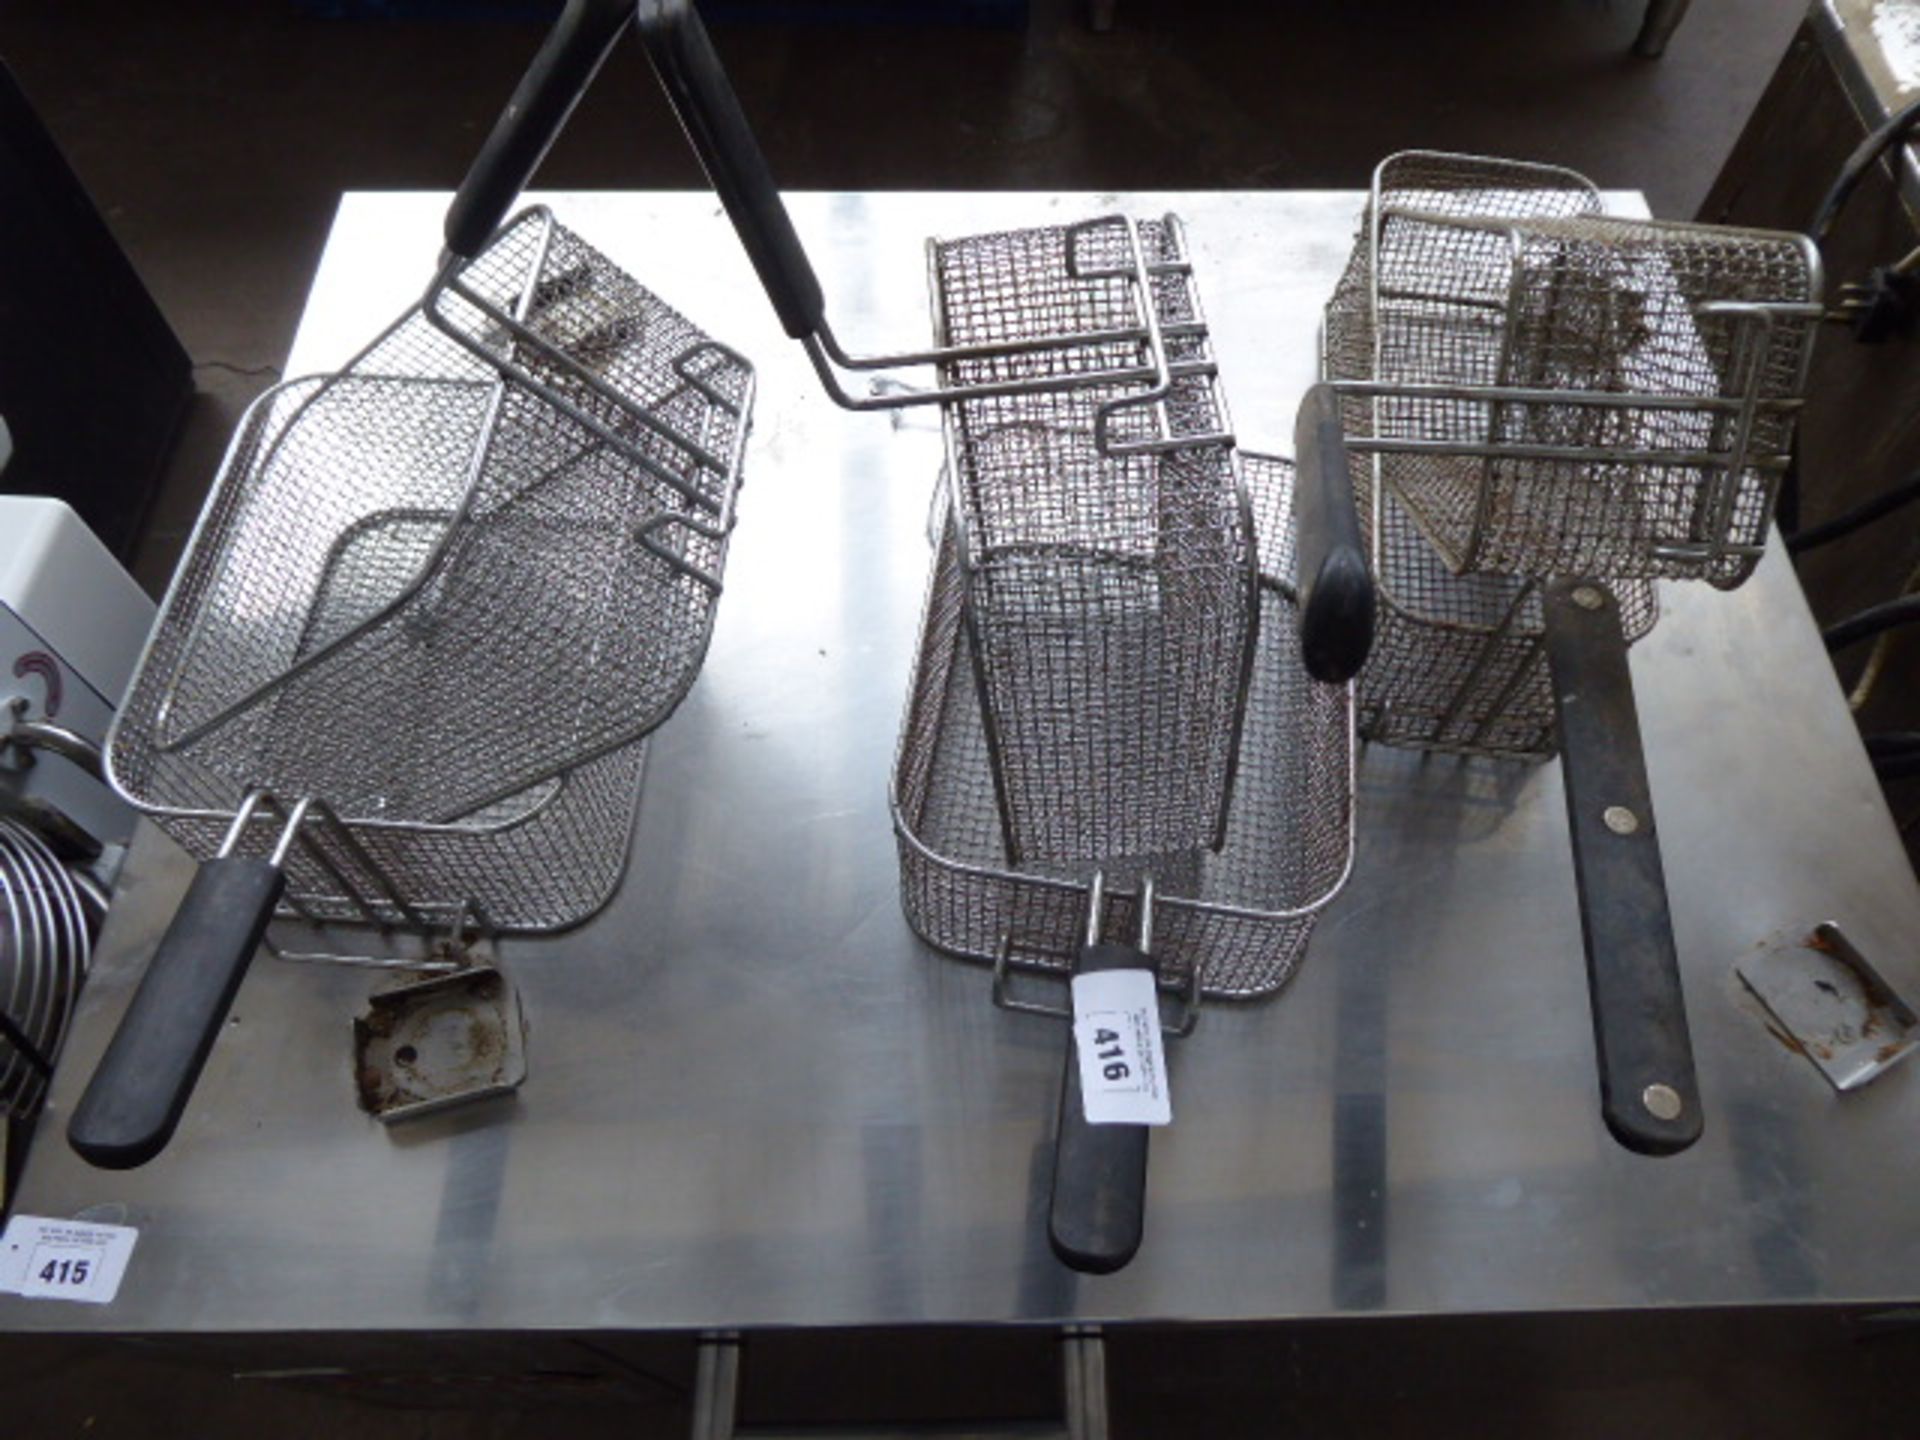 6 assorted size frying baskets